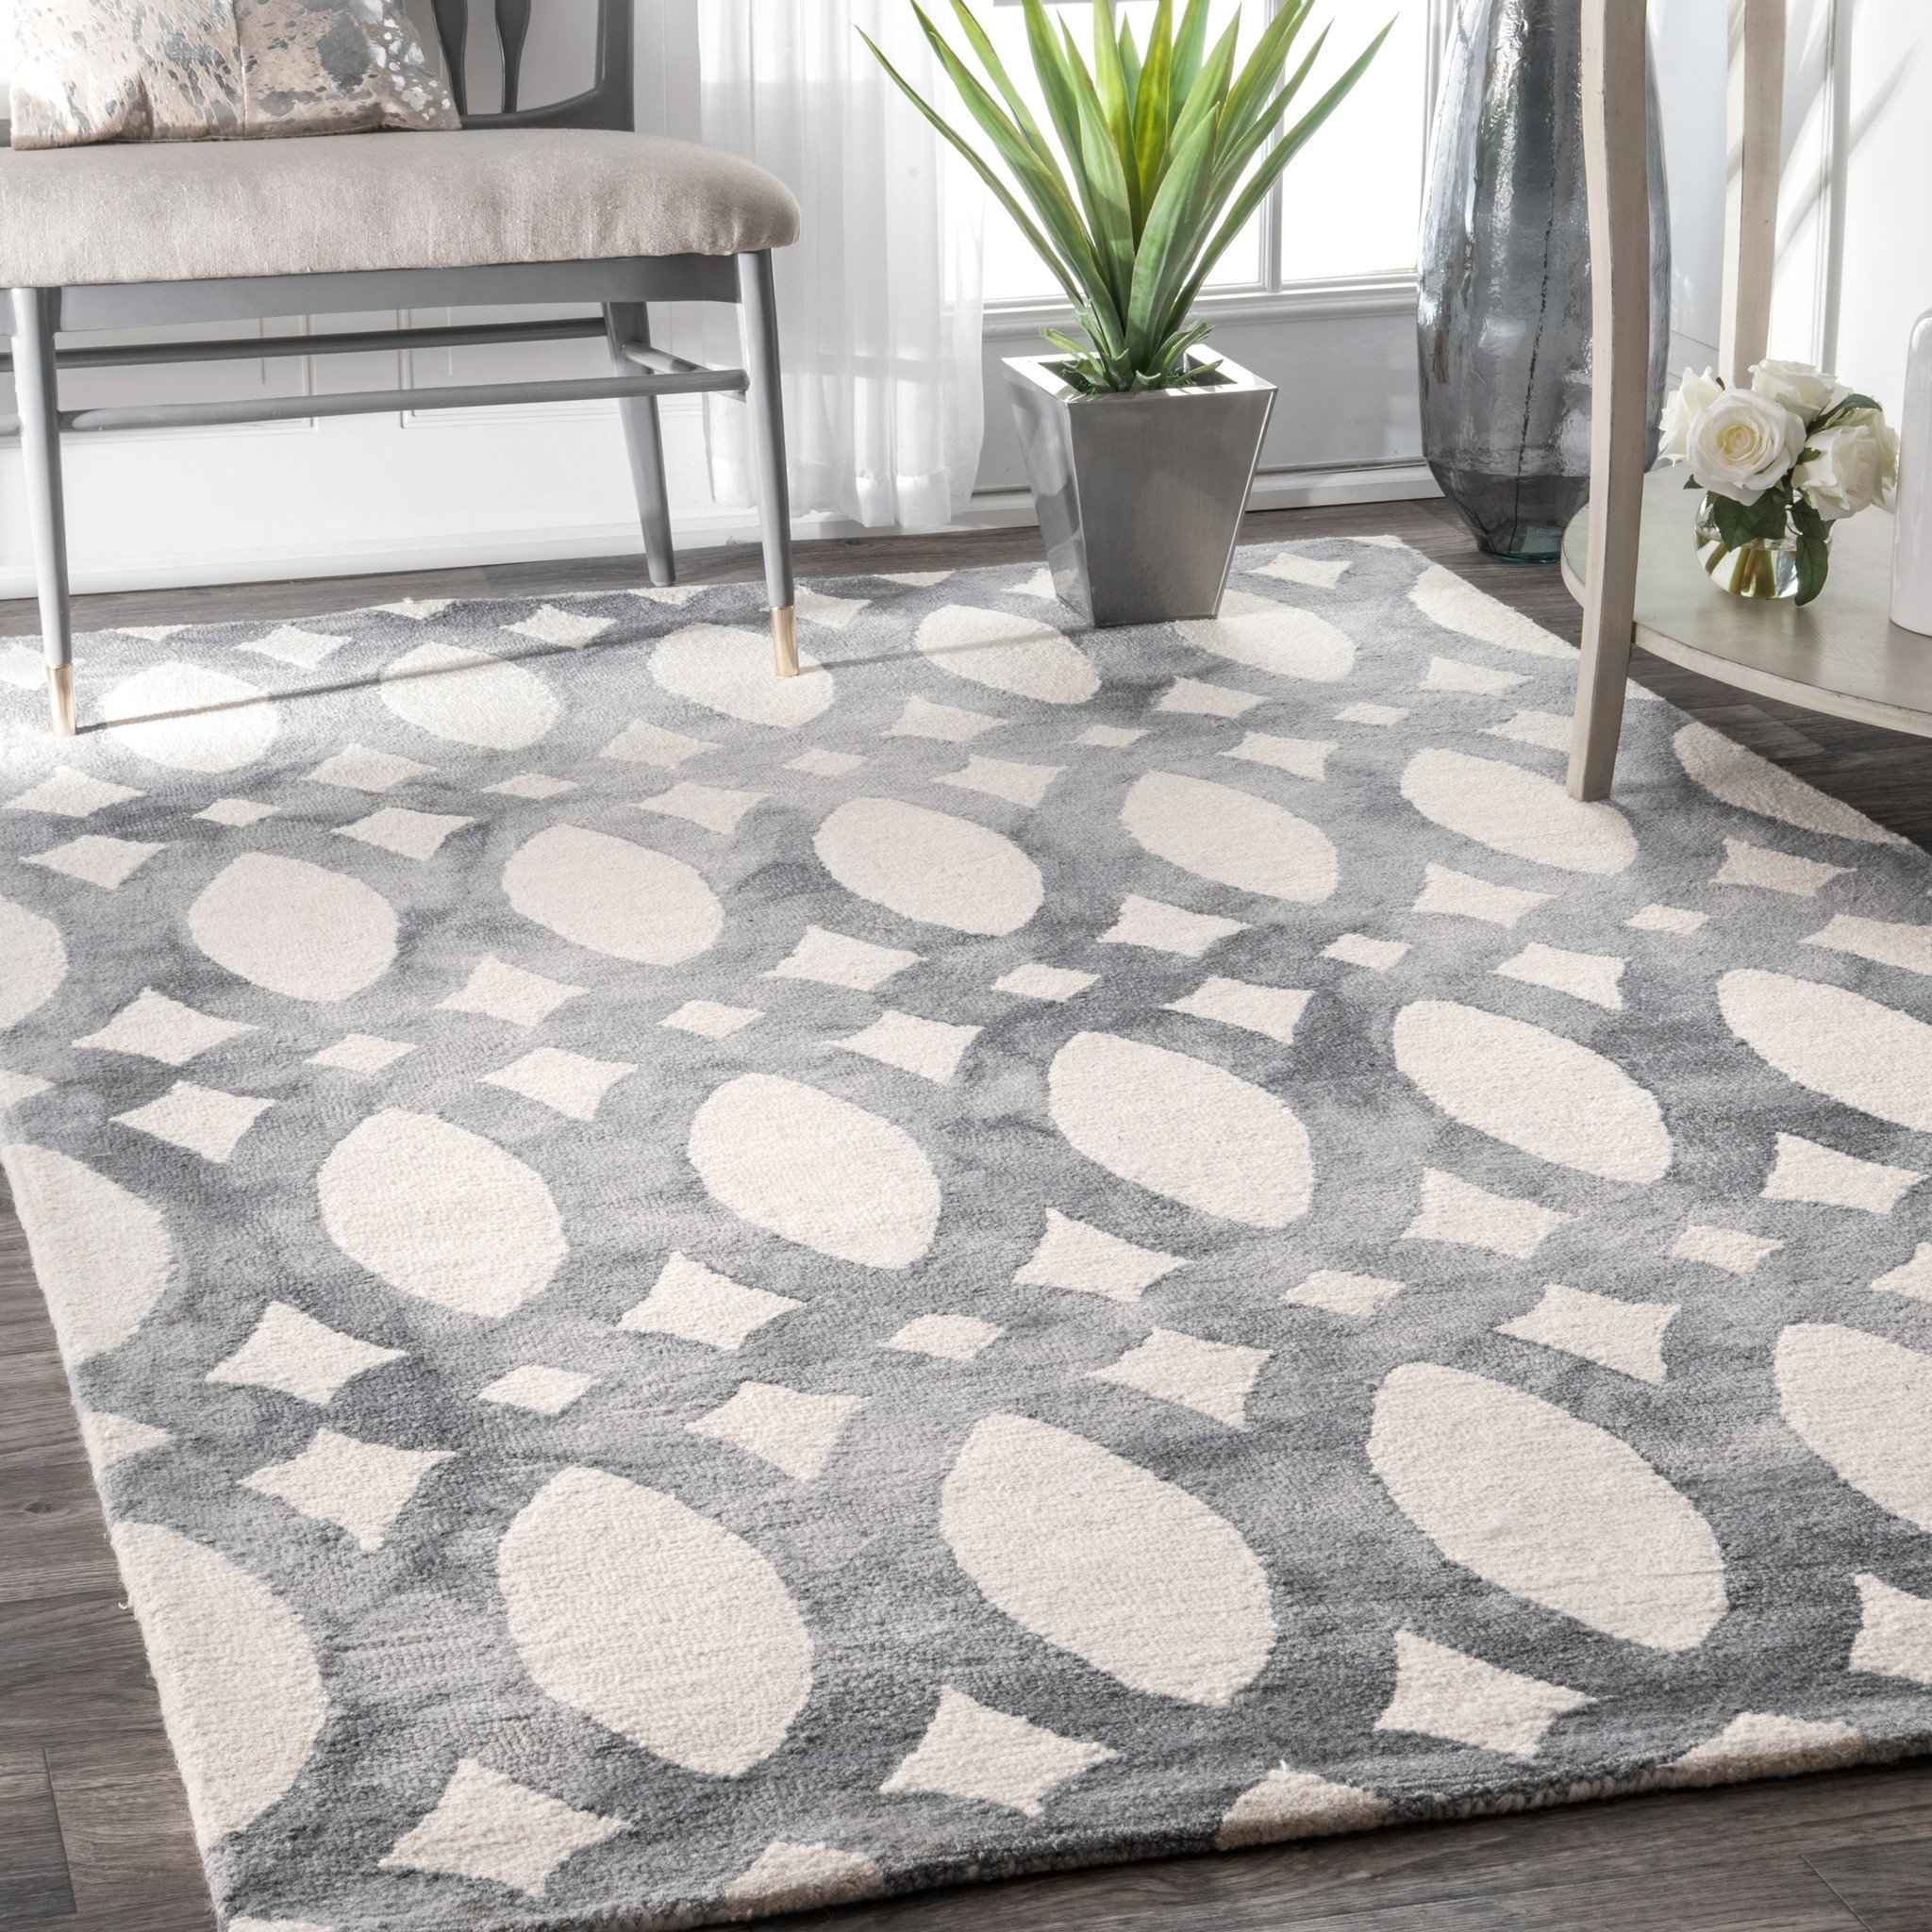 Hand Looped Nellie Rug - Light Grey, 7'6" x 9'6" - Image 1